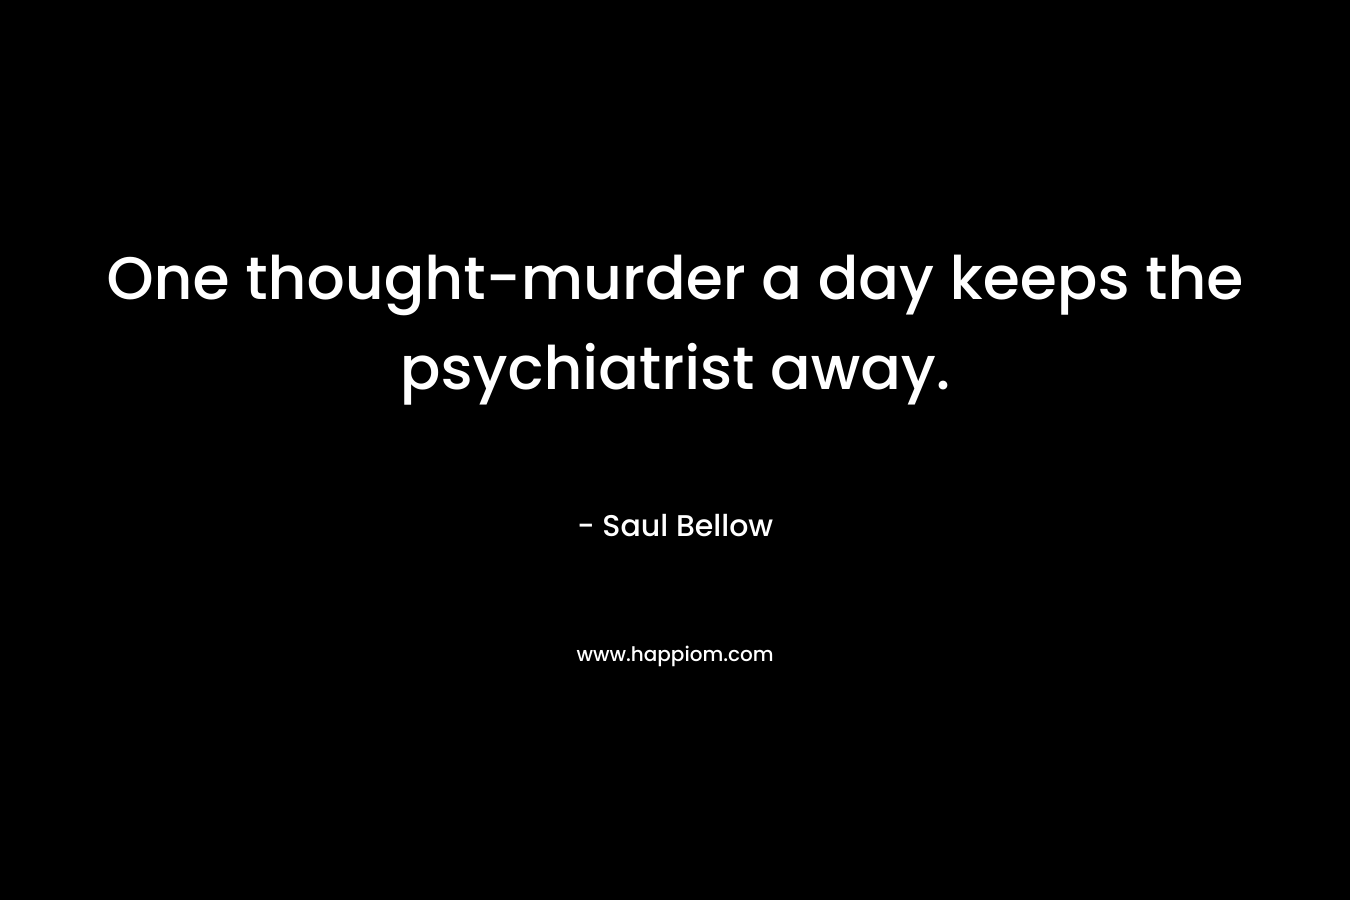 One thought-murder a day keeps the psychiatrist away. – Saul Bellow